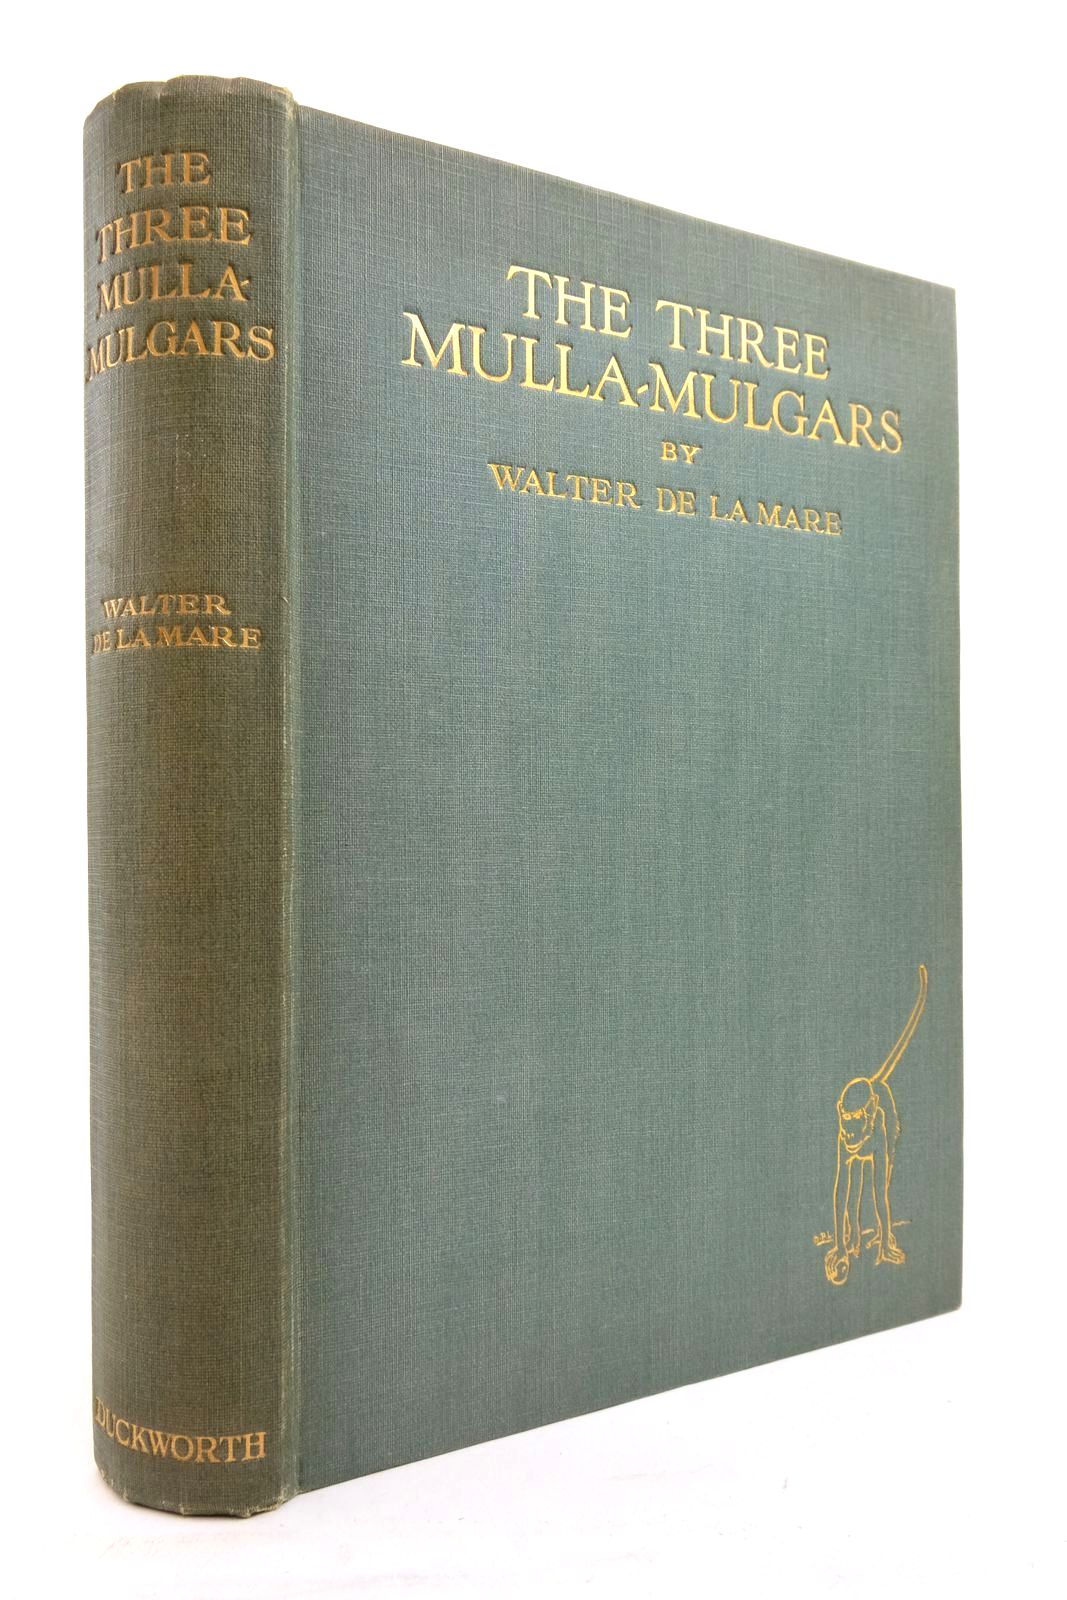 Photo of THE THREE MULLA-MULGARS written by De La Mare, Walter illustrated by Lathrop, Dorothy P. published by Duckworth &amp; Co. (STOCK CODE: 2138021)  for sale by Stella & Rose's Books